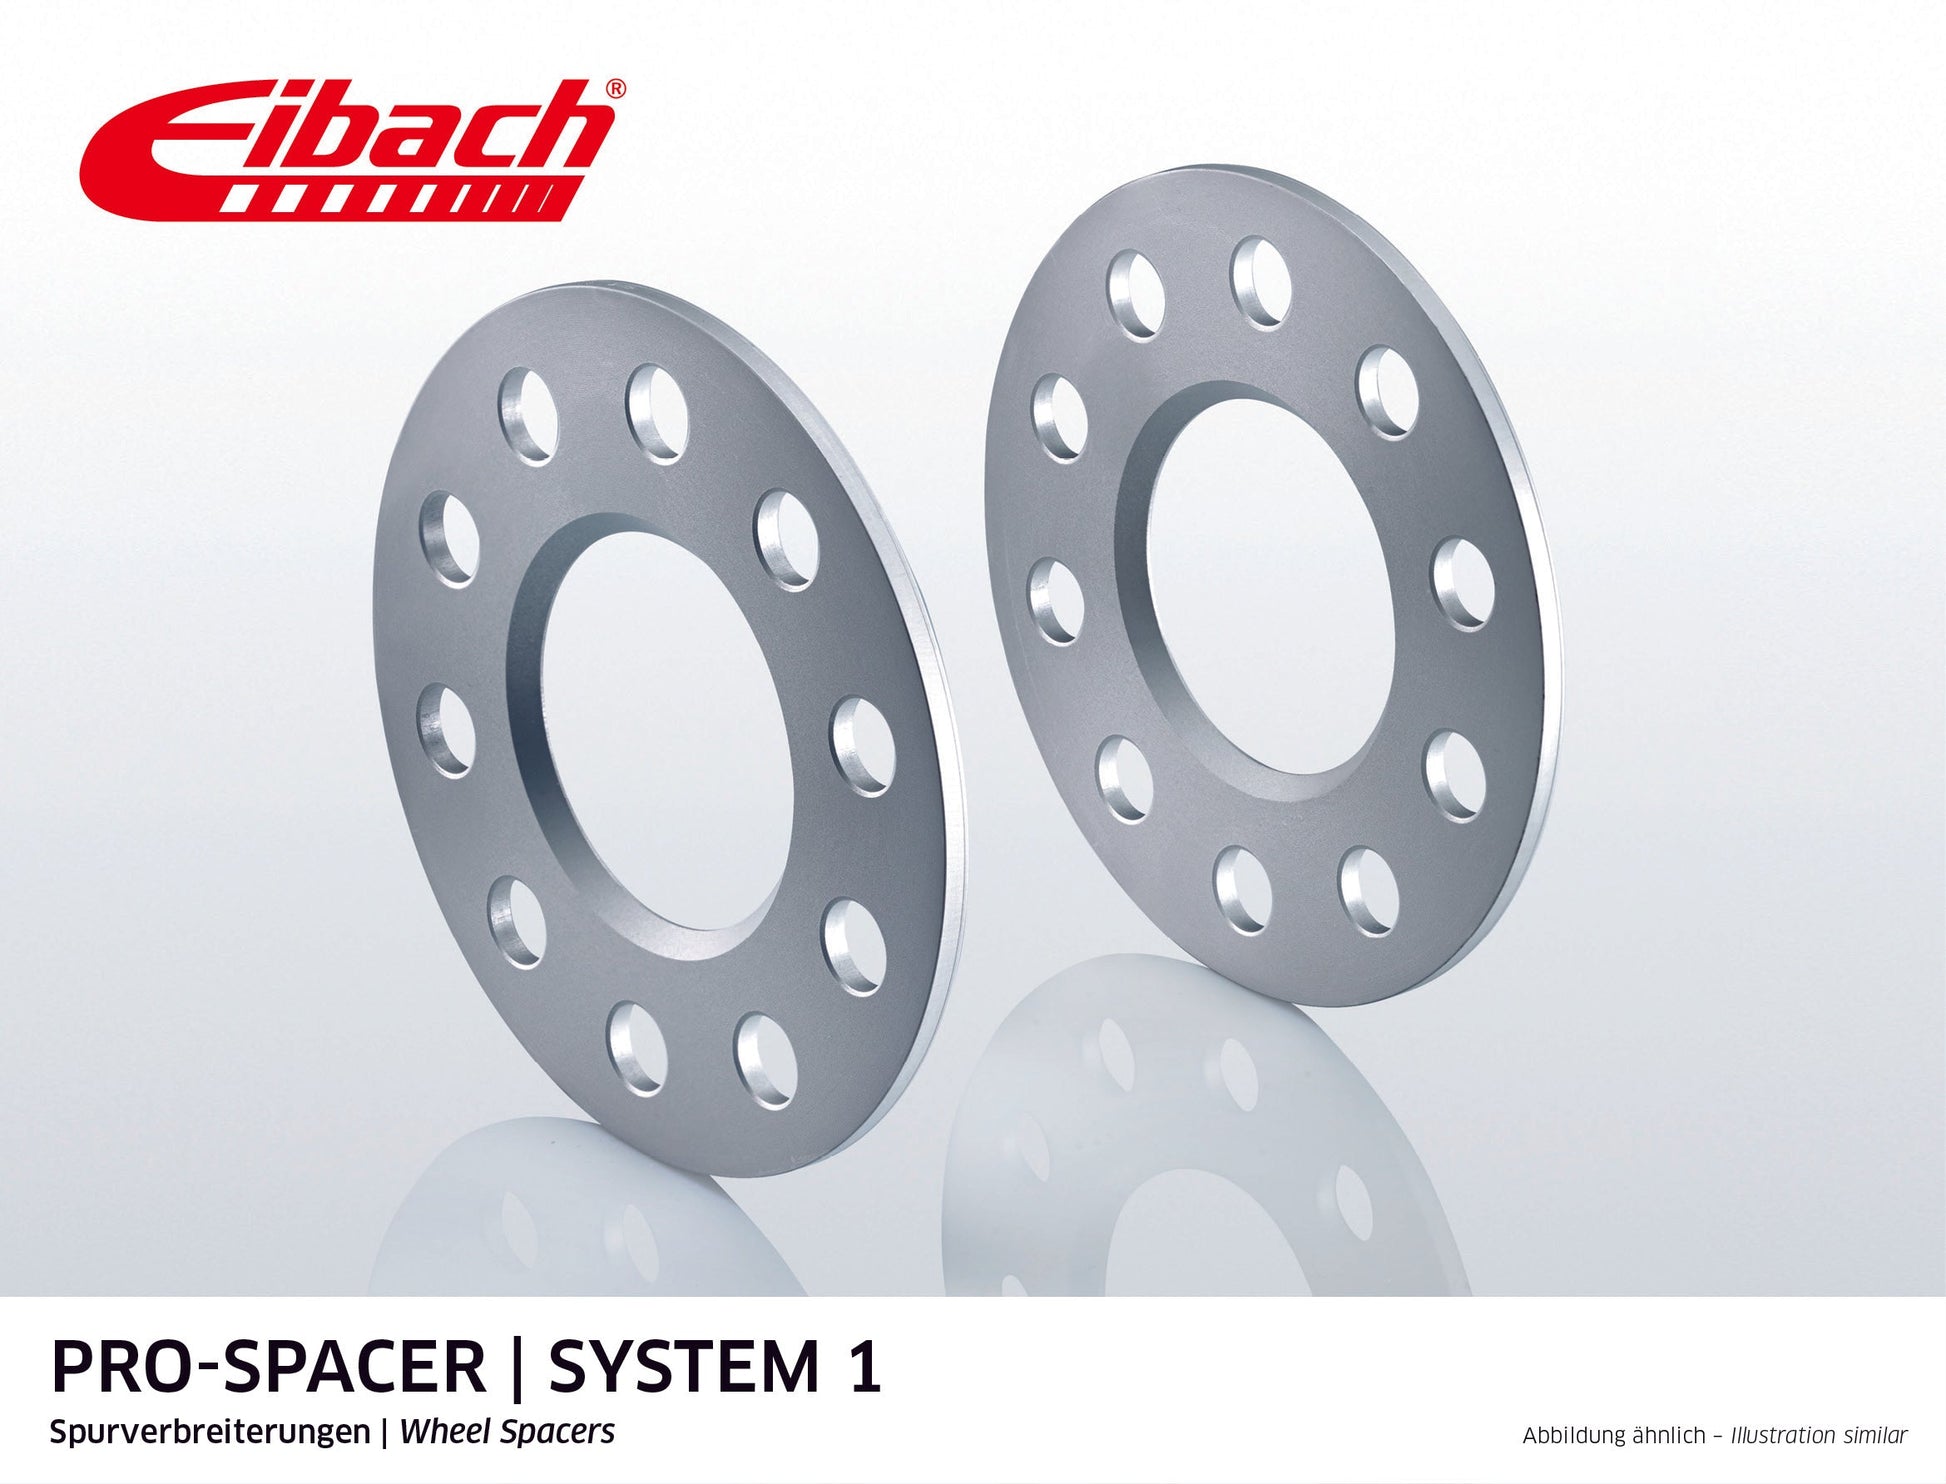 Eibach Pro-Spacer Kit (Pair Of Spacers) 5mm Per Spacer (System 1) S90-1-05-010 (Silver) at £59.42